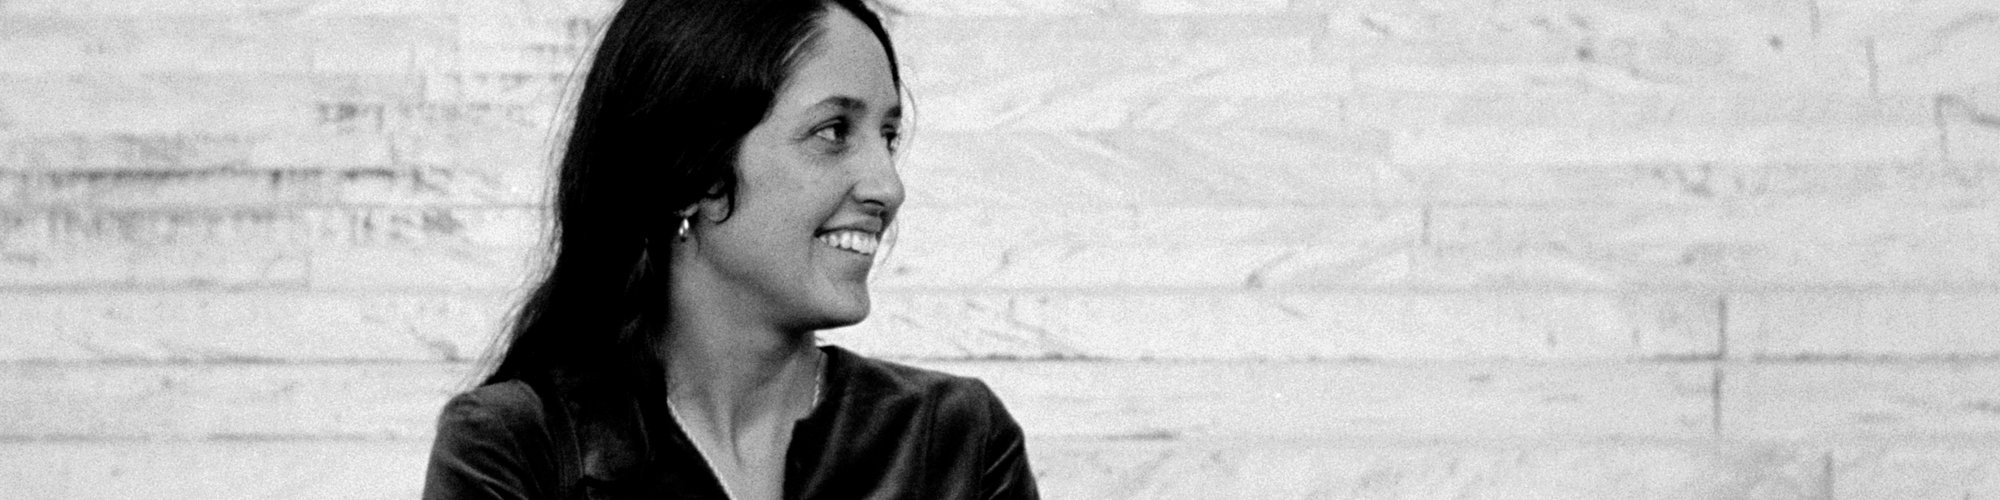 Joan_Baez_at_the_Alabama_State_Capitol_in_1965,_from_JOAN_BAEZ_I_AM_A_NOISE,_a_Magnolia_Pictures_release